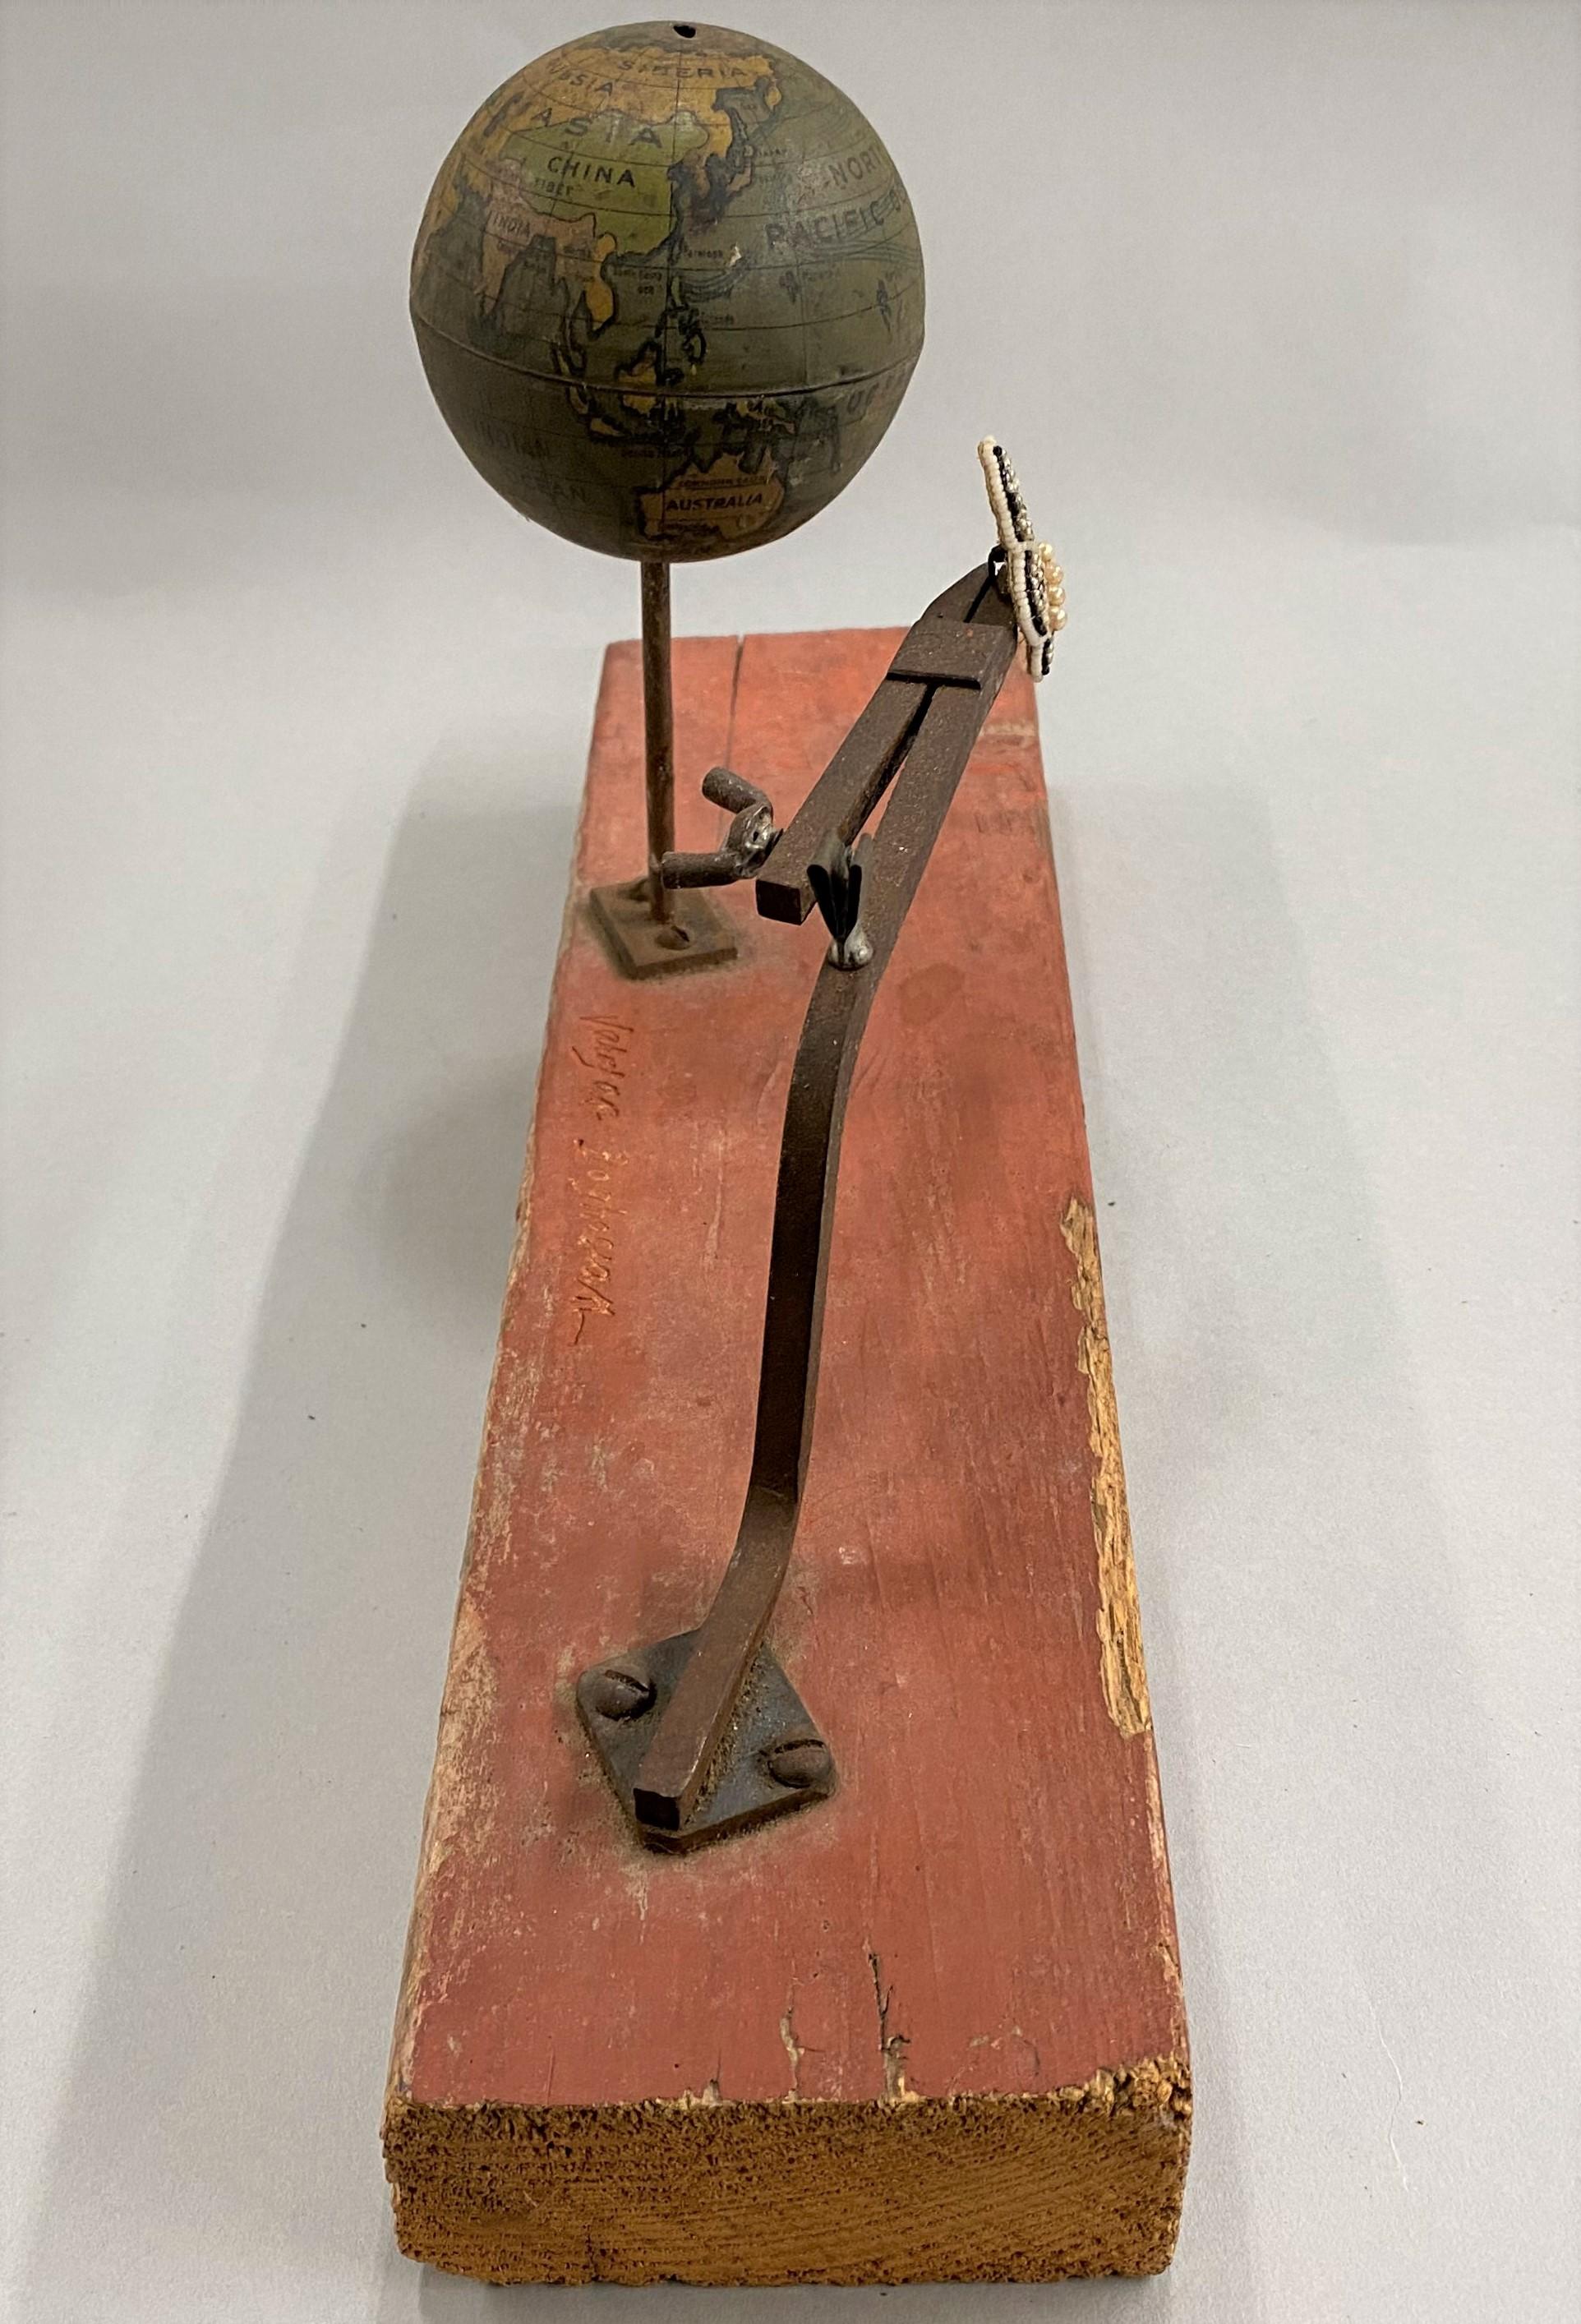 A fine assemblage sculpture by American artist Varujan Boghosian (1926-2020). Boghosian was born in New Britain, CT and after serving in the United States Navy, he attended Central Connecticut Teachers College and the Vesper George School of Art in